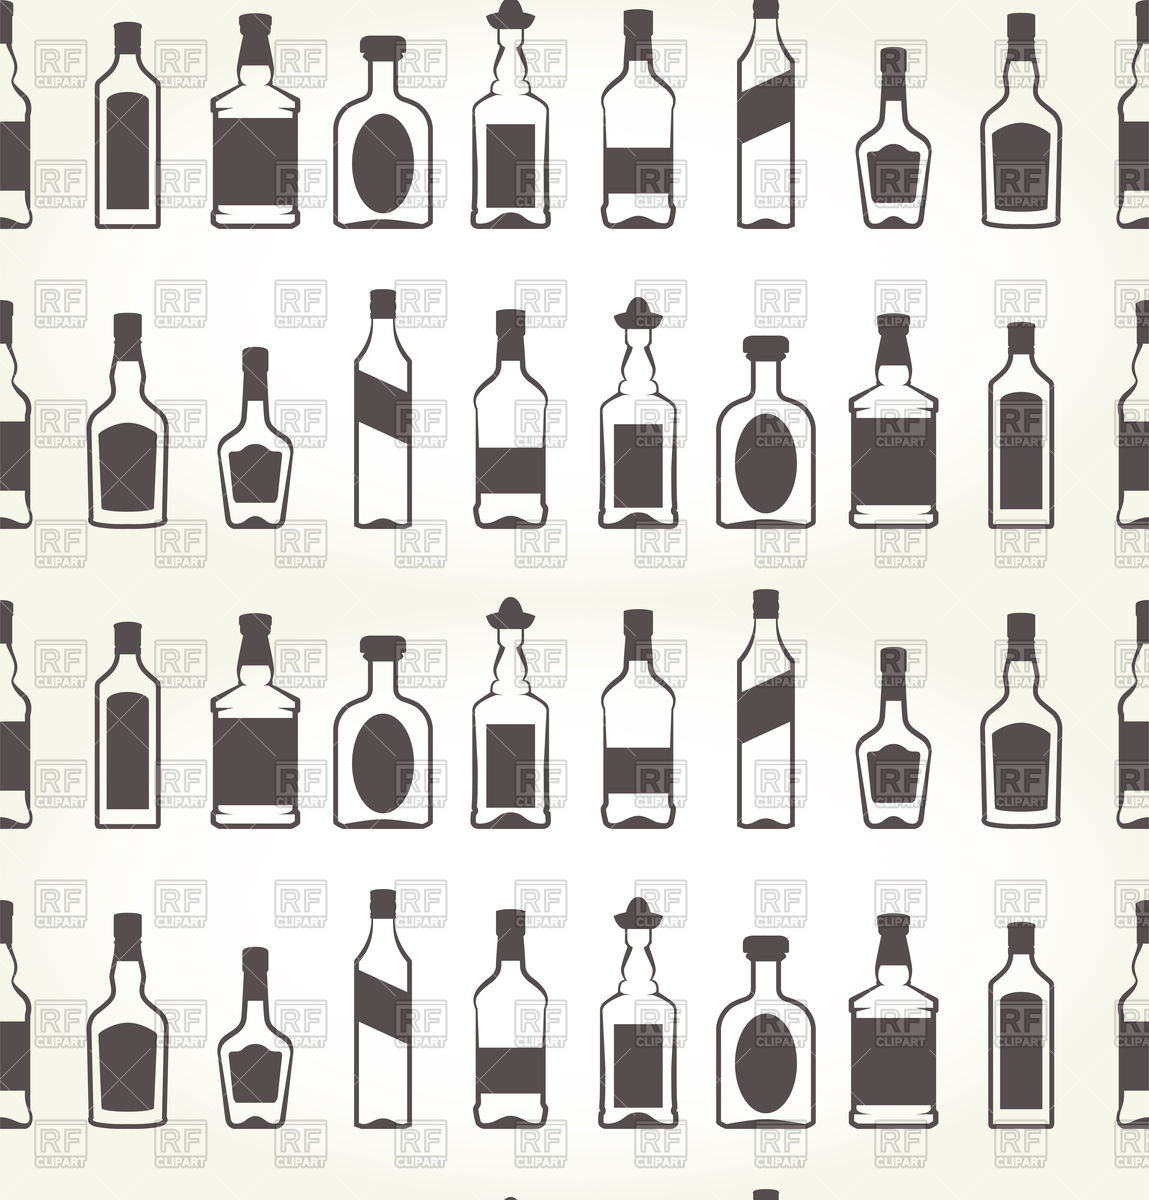 Alcohol Bottels Seamless Patten Booze Background Vector Image Of